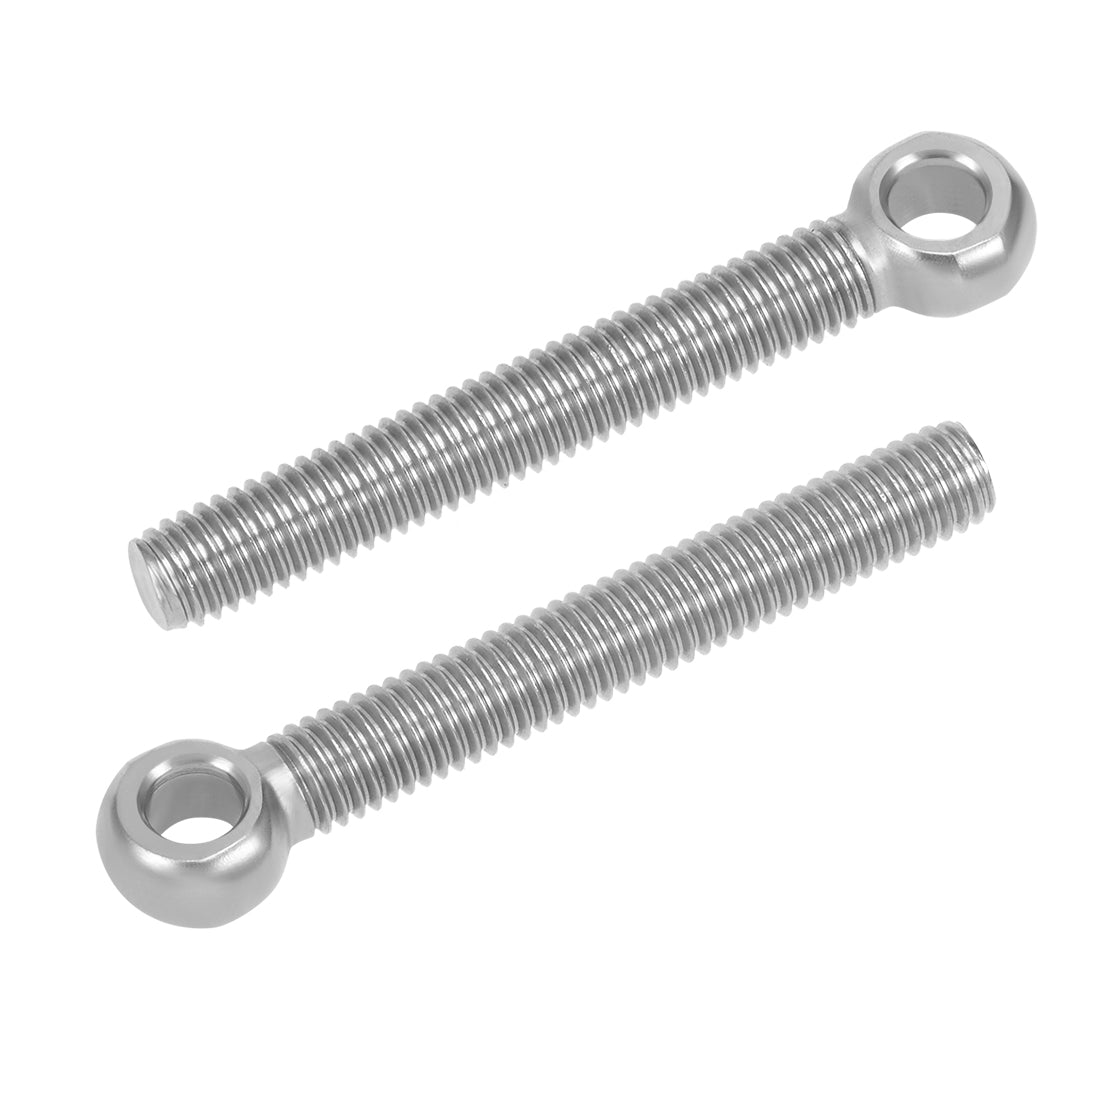 uxcell Uxcell M8 x 60mm Machinery Shoulder Swing Lifting Eye Bolt 304 Stainless Steel Metric Thread 2pcs